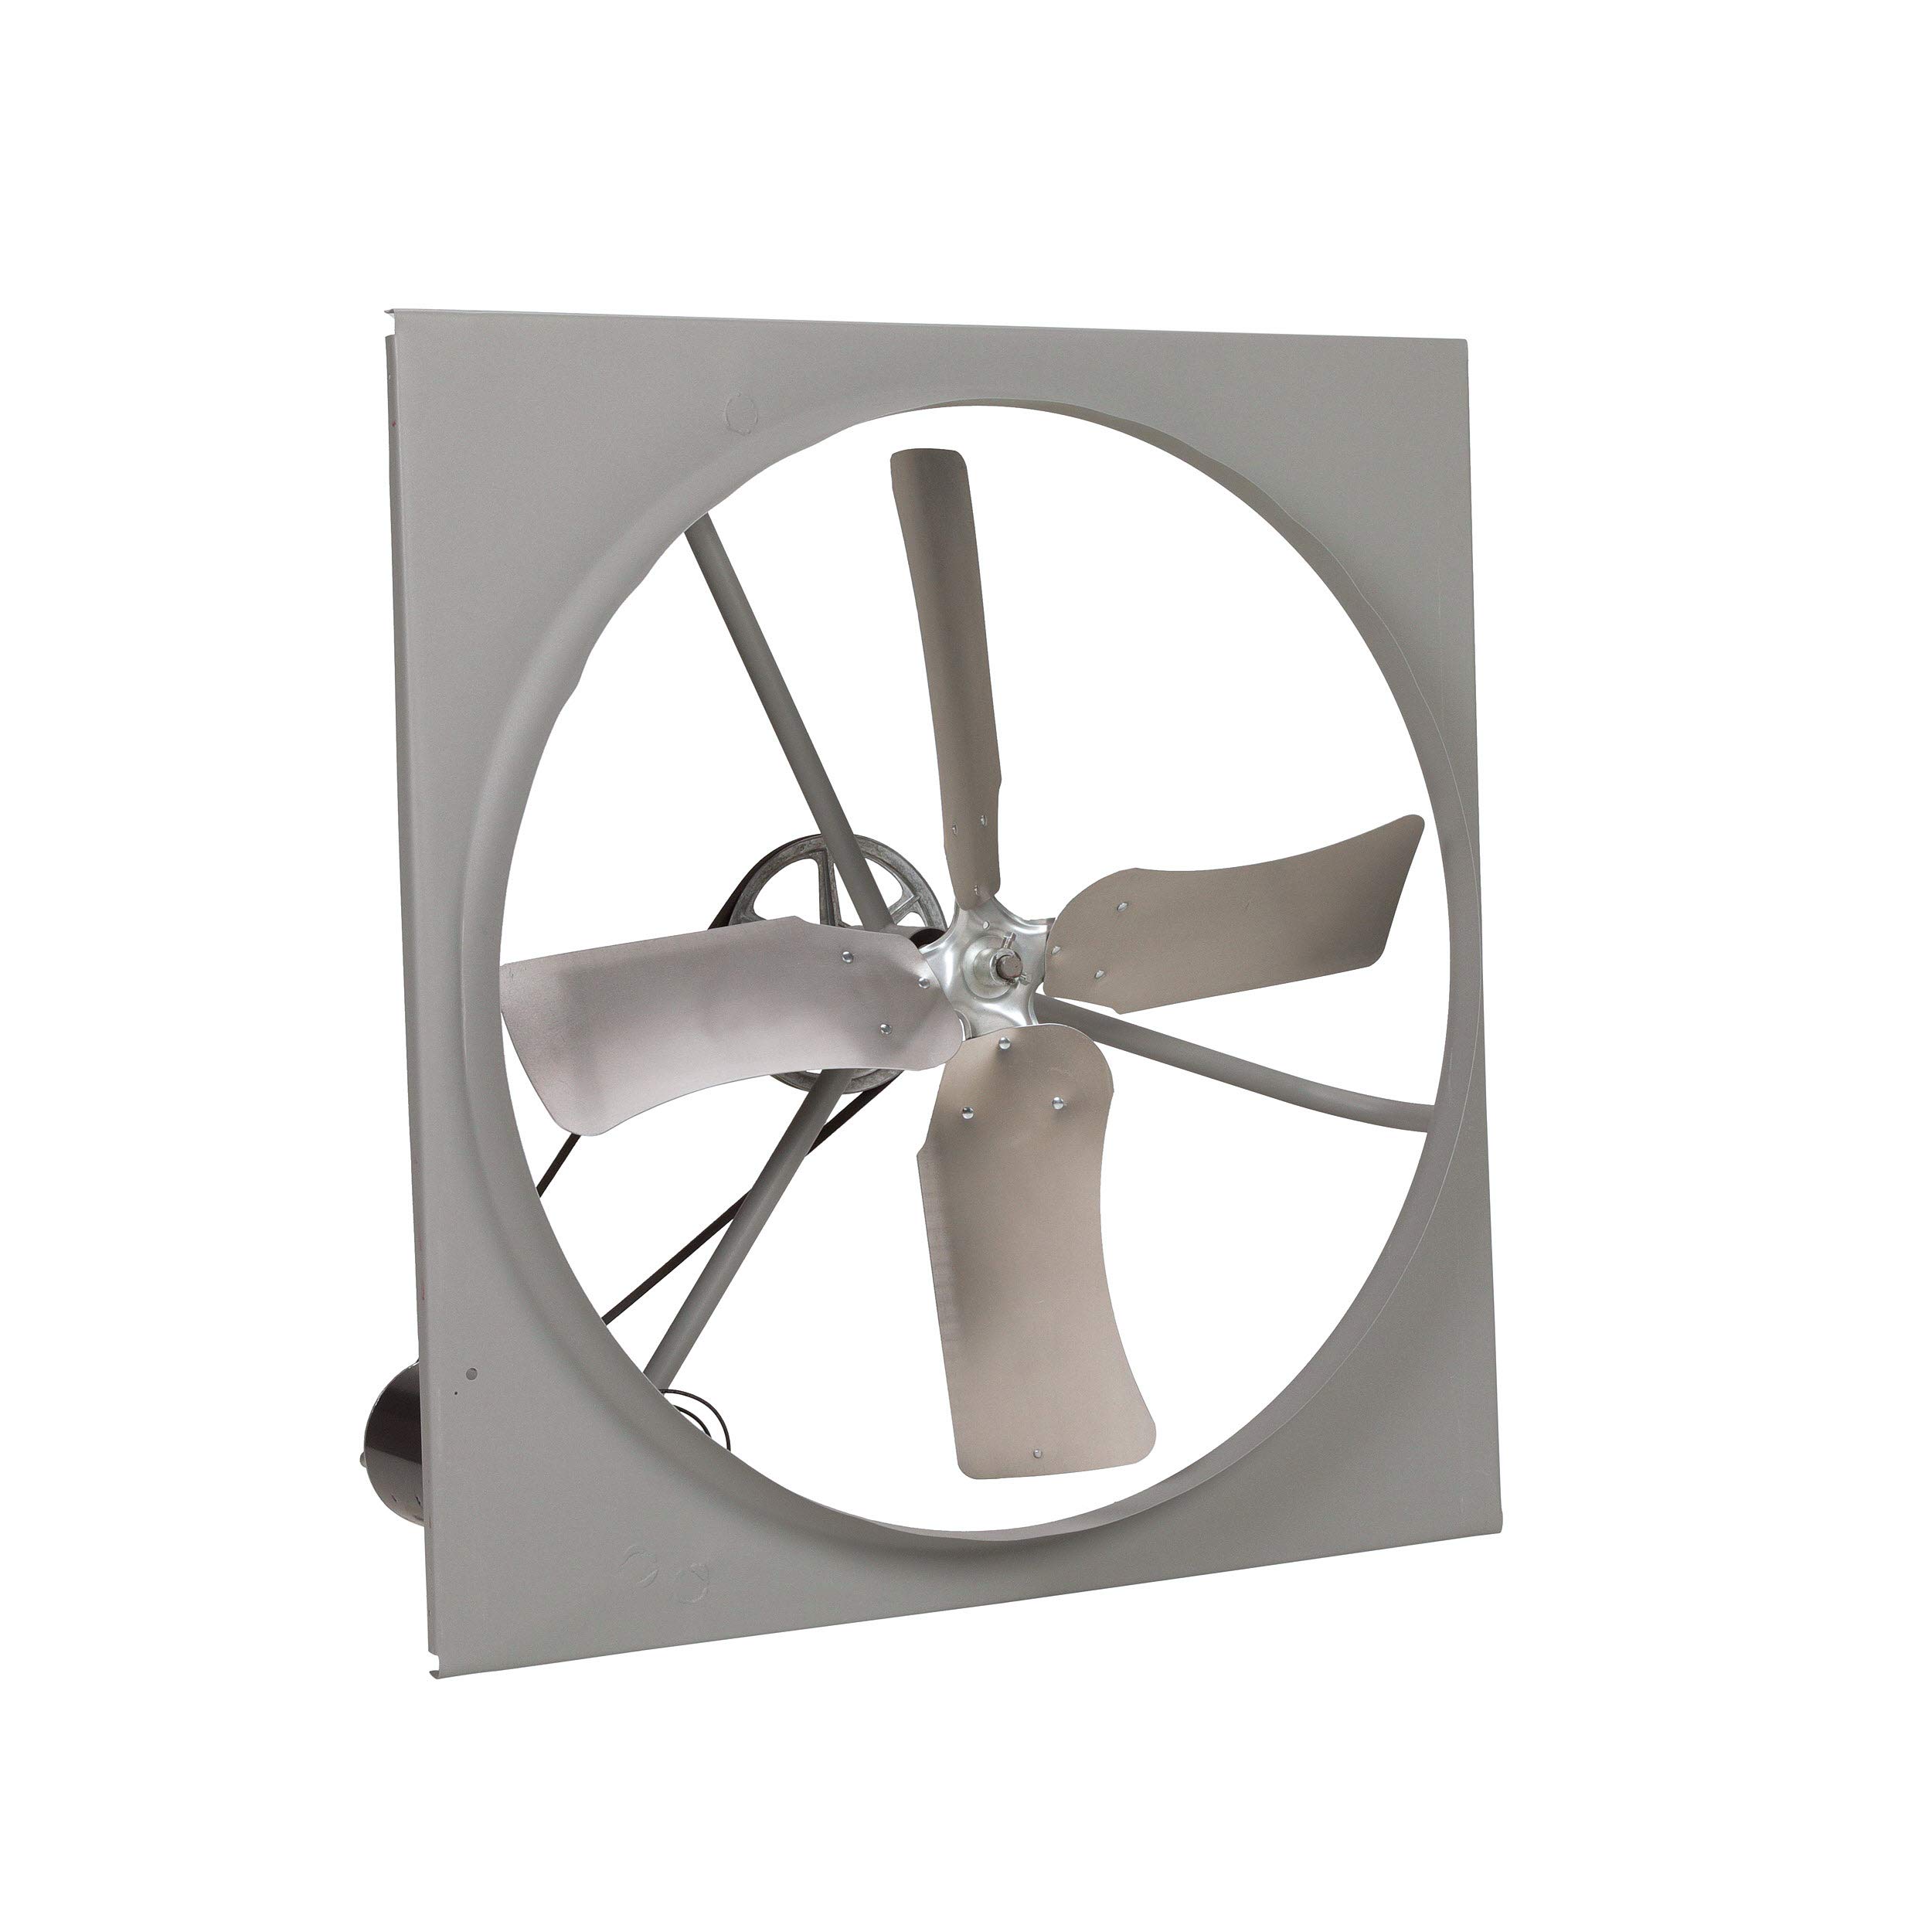 TPI Corporation CE-36-B Commercial Exhaust Fan, Single Phase, 36